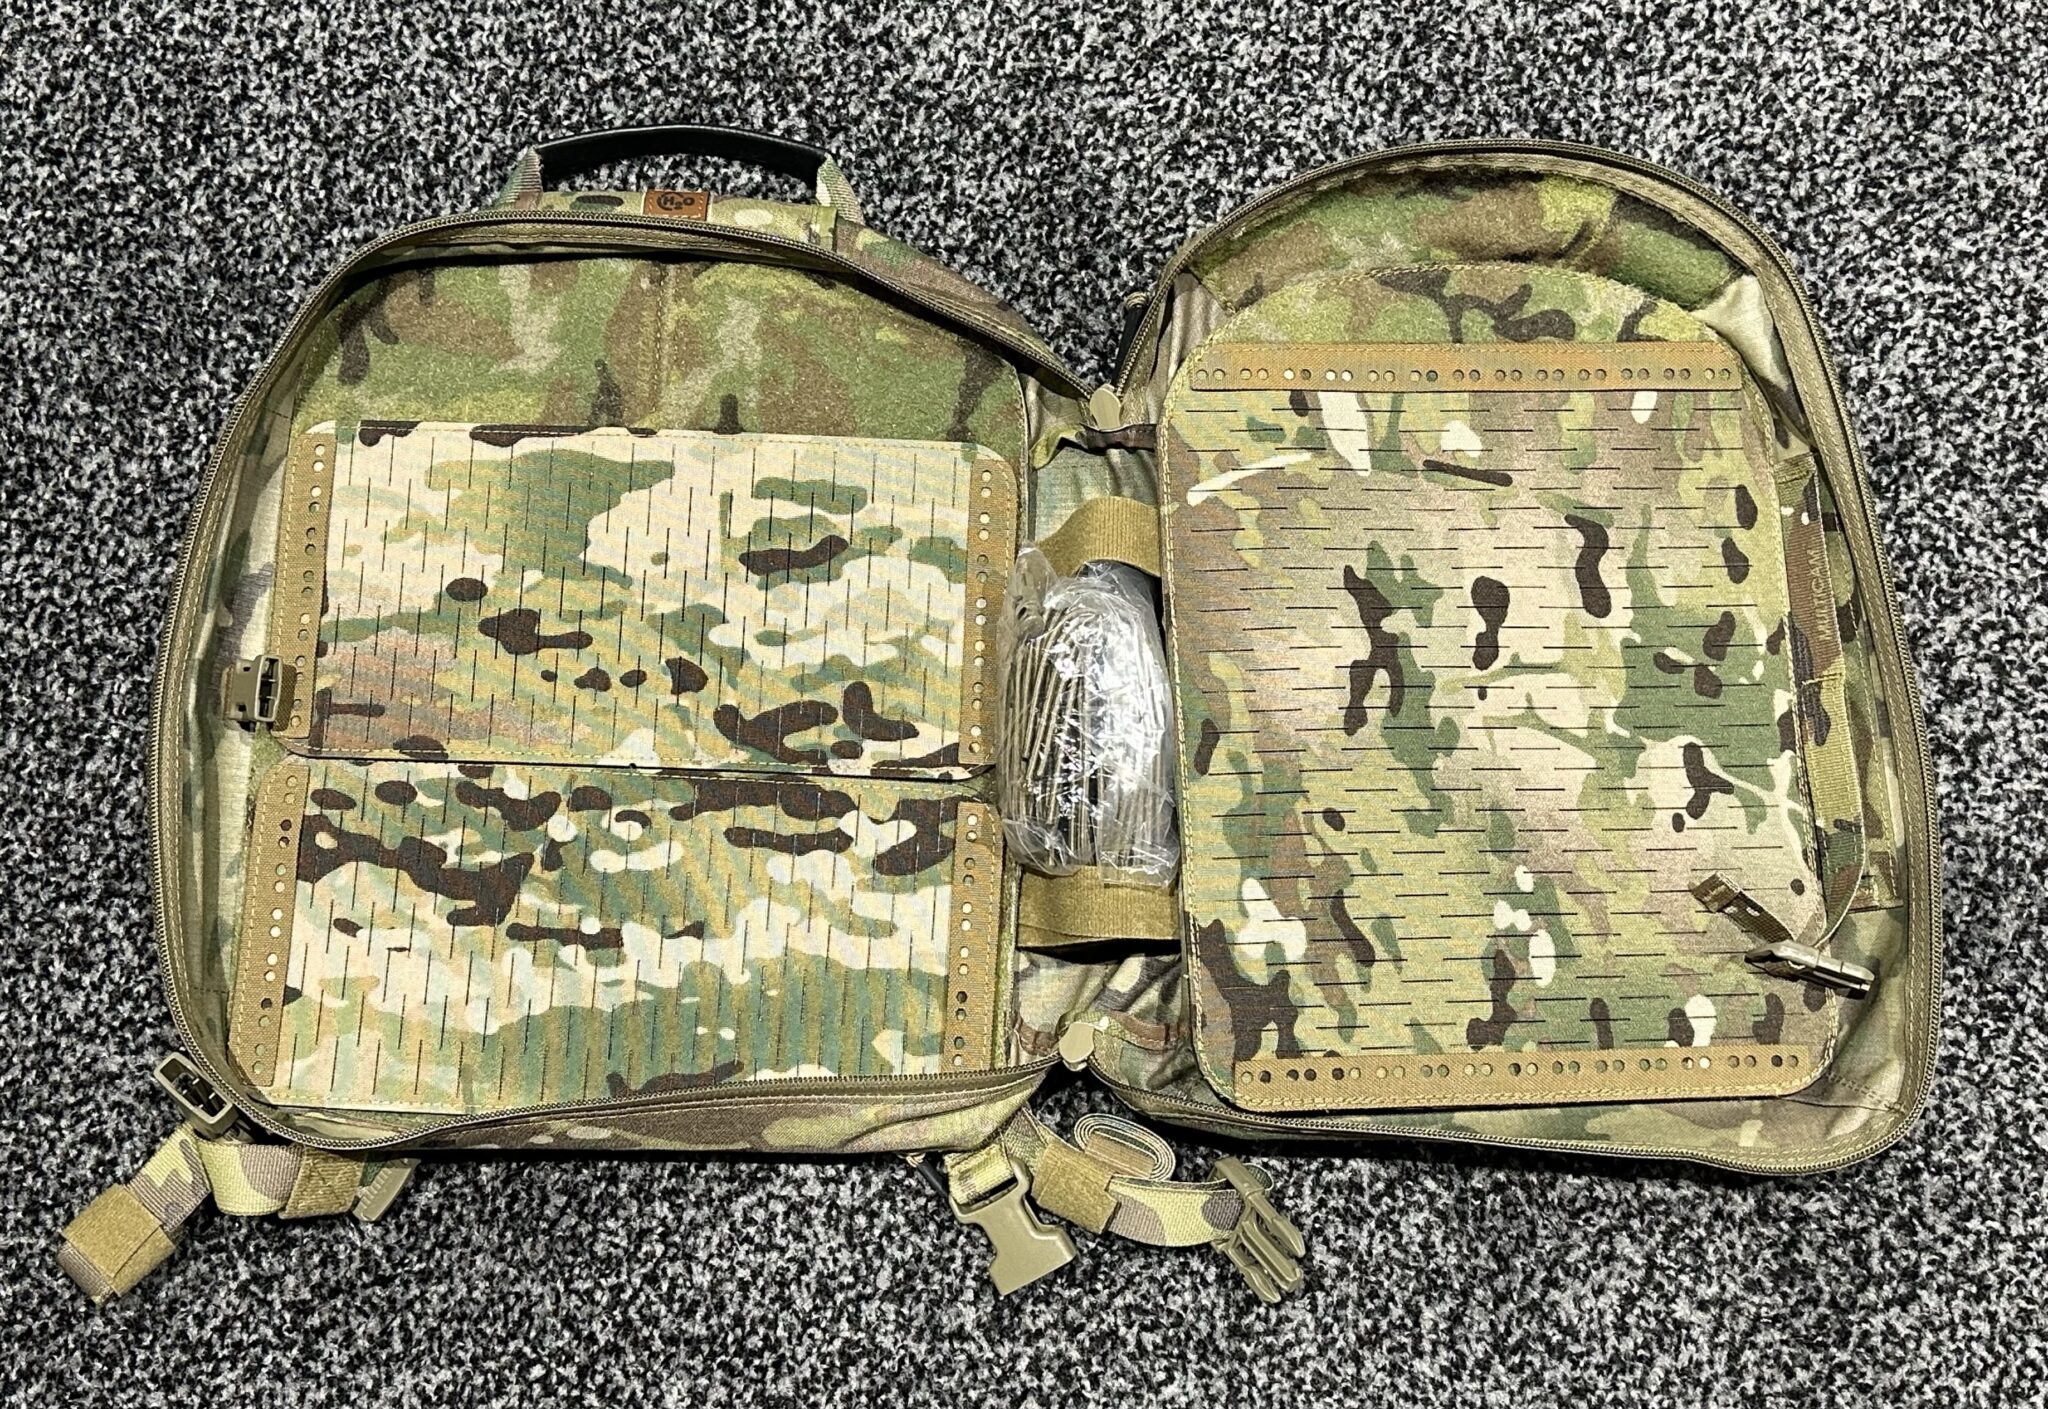 Soldier Systems Daily - An Industry Daily and Tactical Gear News Blog